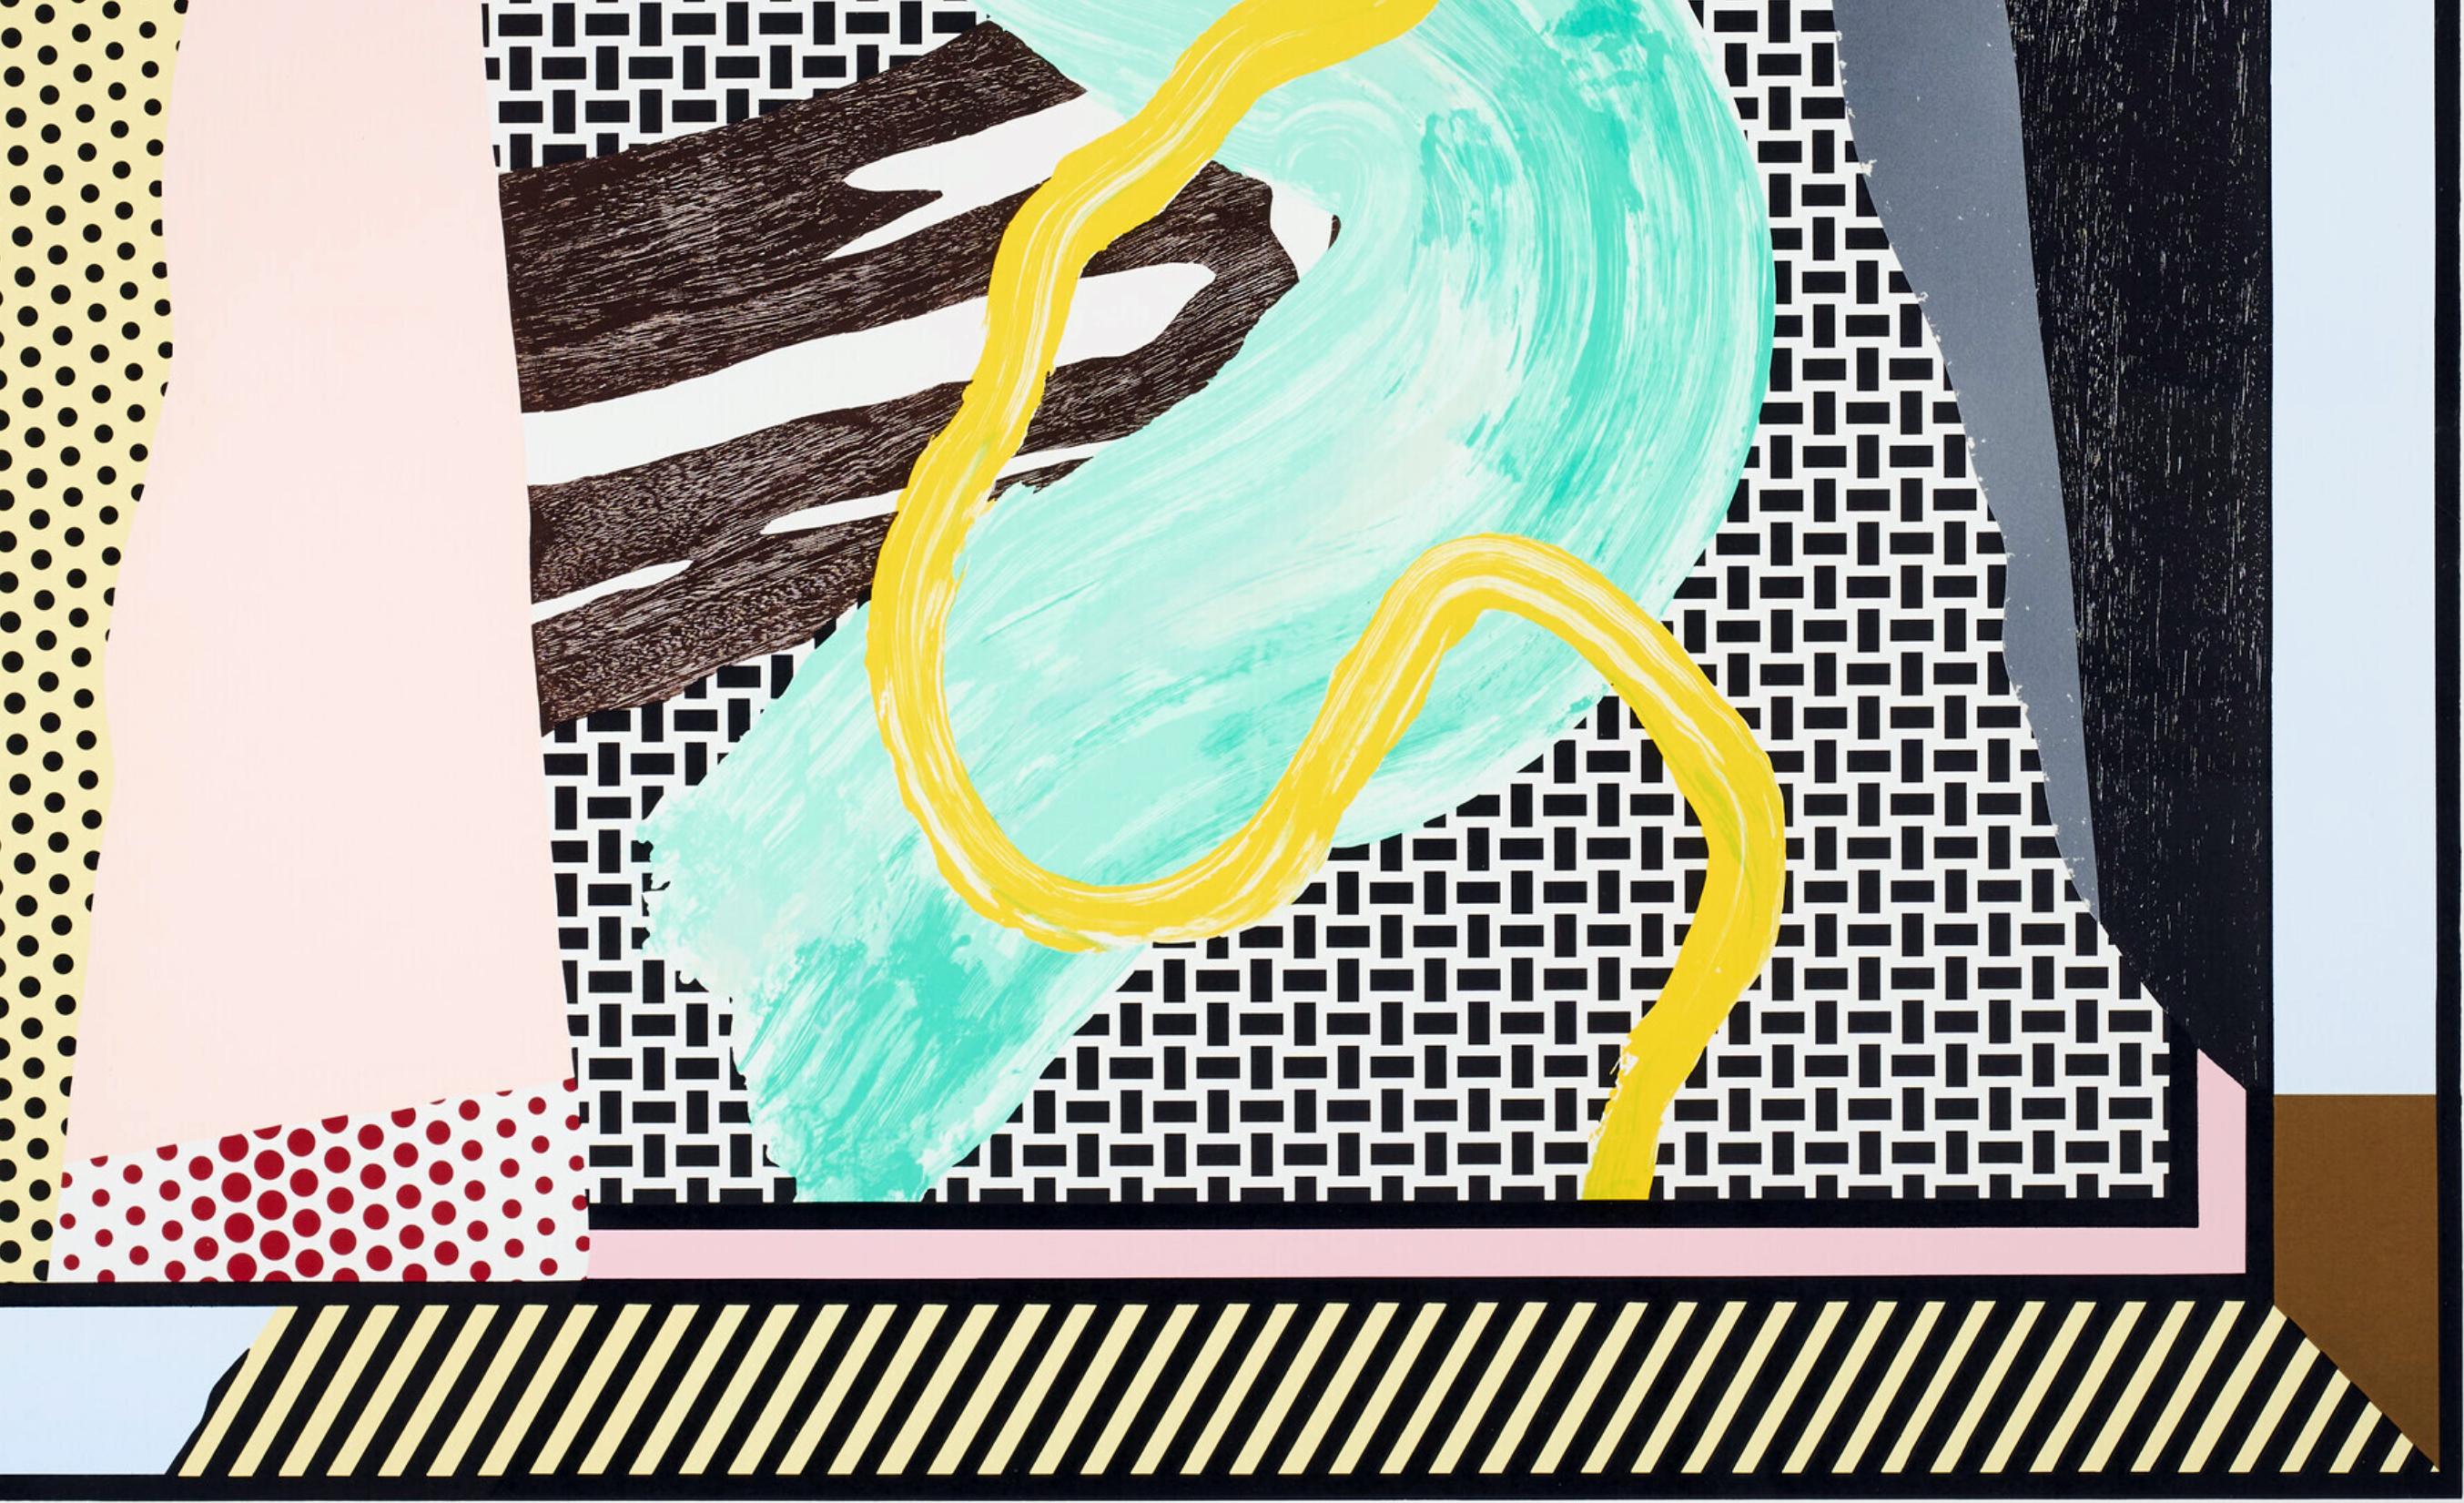 Roy Lichtenstein, Reflections on Brushstrokes, from Reflections Series 2